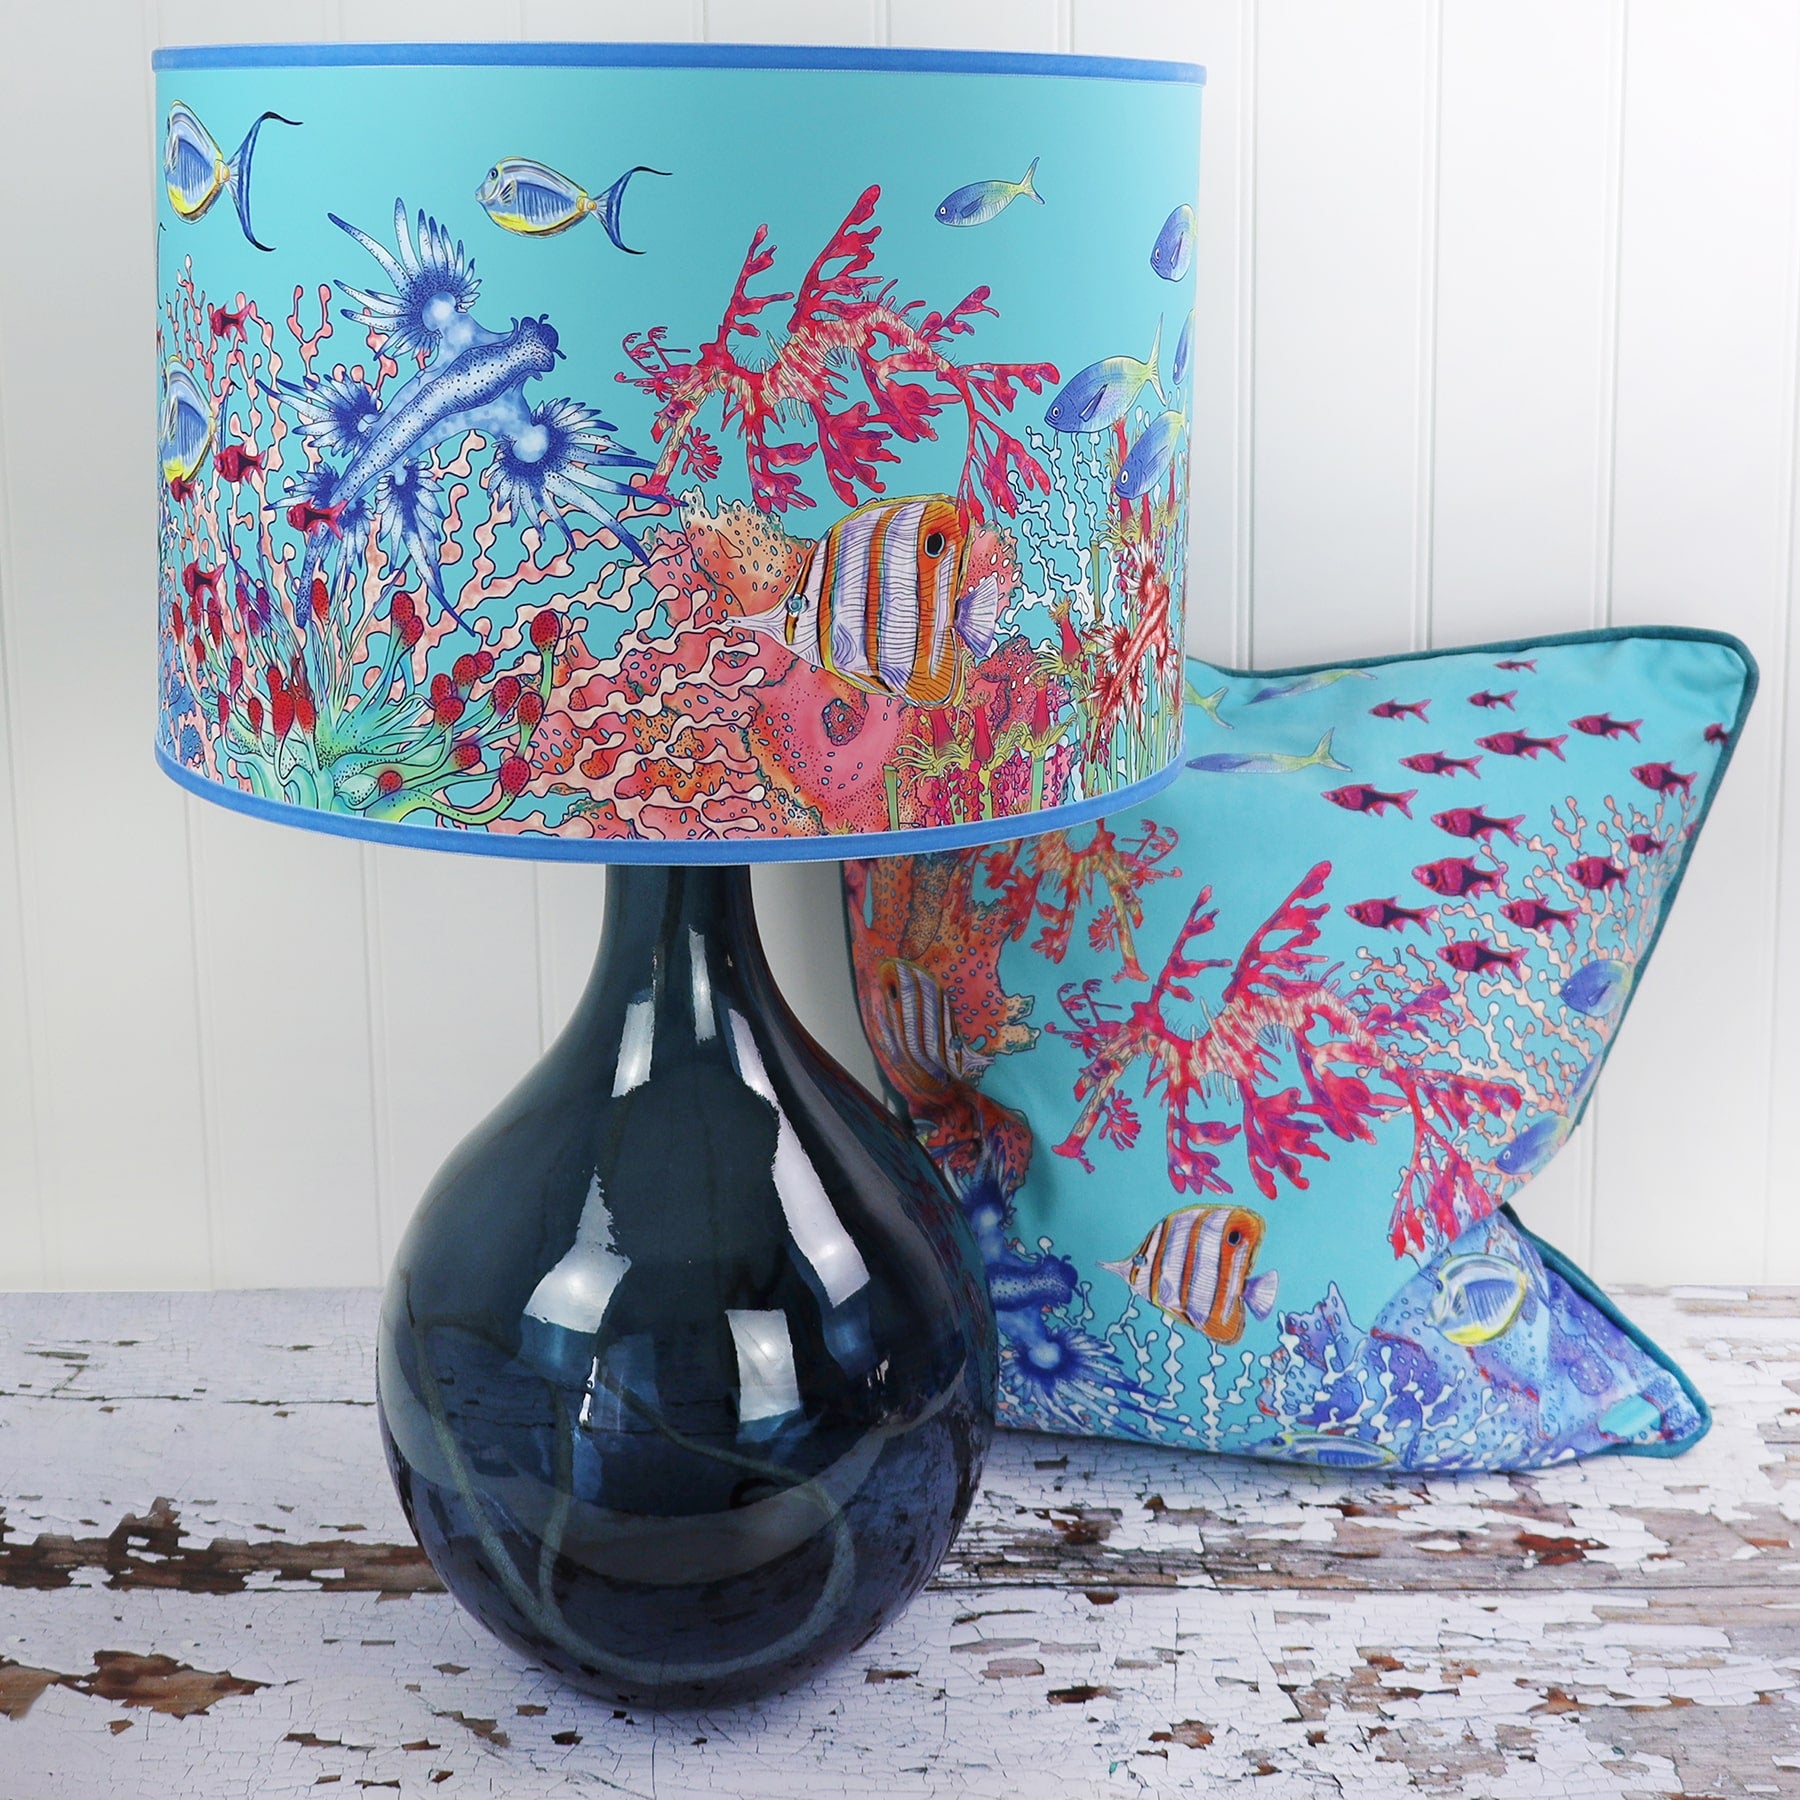 Coral Bay design lampshades in Turquoise on a glass lampbase in front of a Turquoise Coral Bay cushion